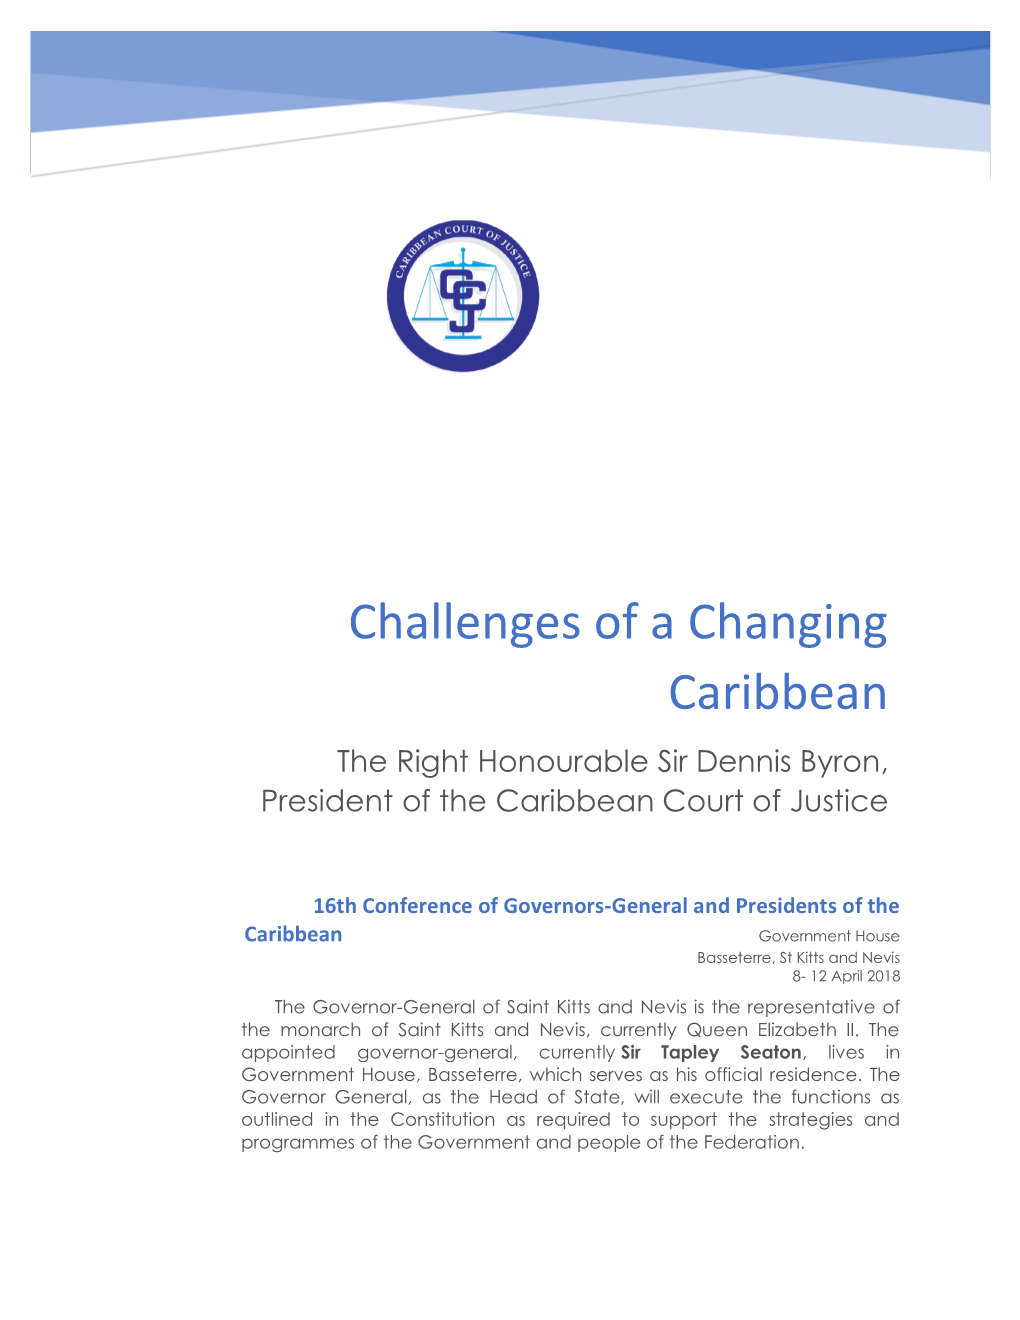 Challenges of a Changing Caribbean the Right Honourable Sir Dennis Byron, President of the Caribbean Court of Justice